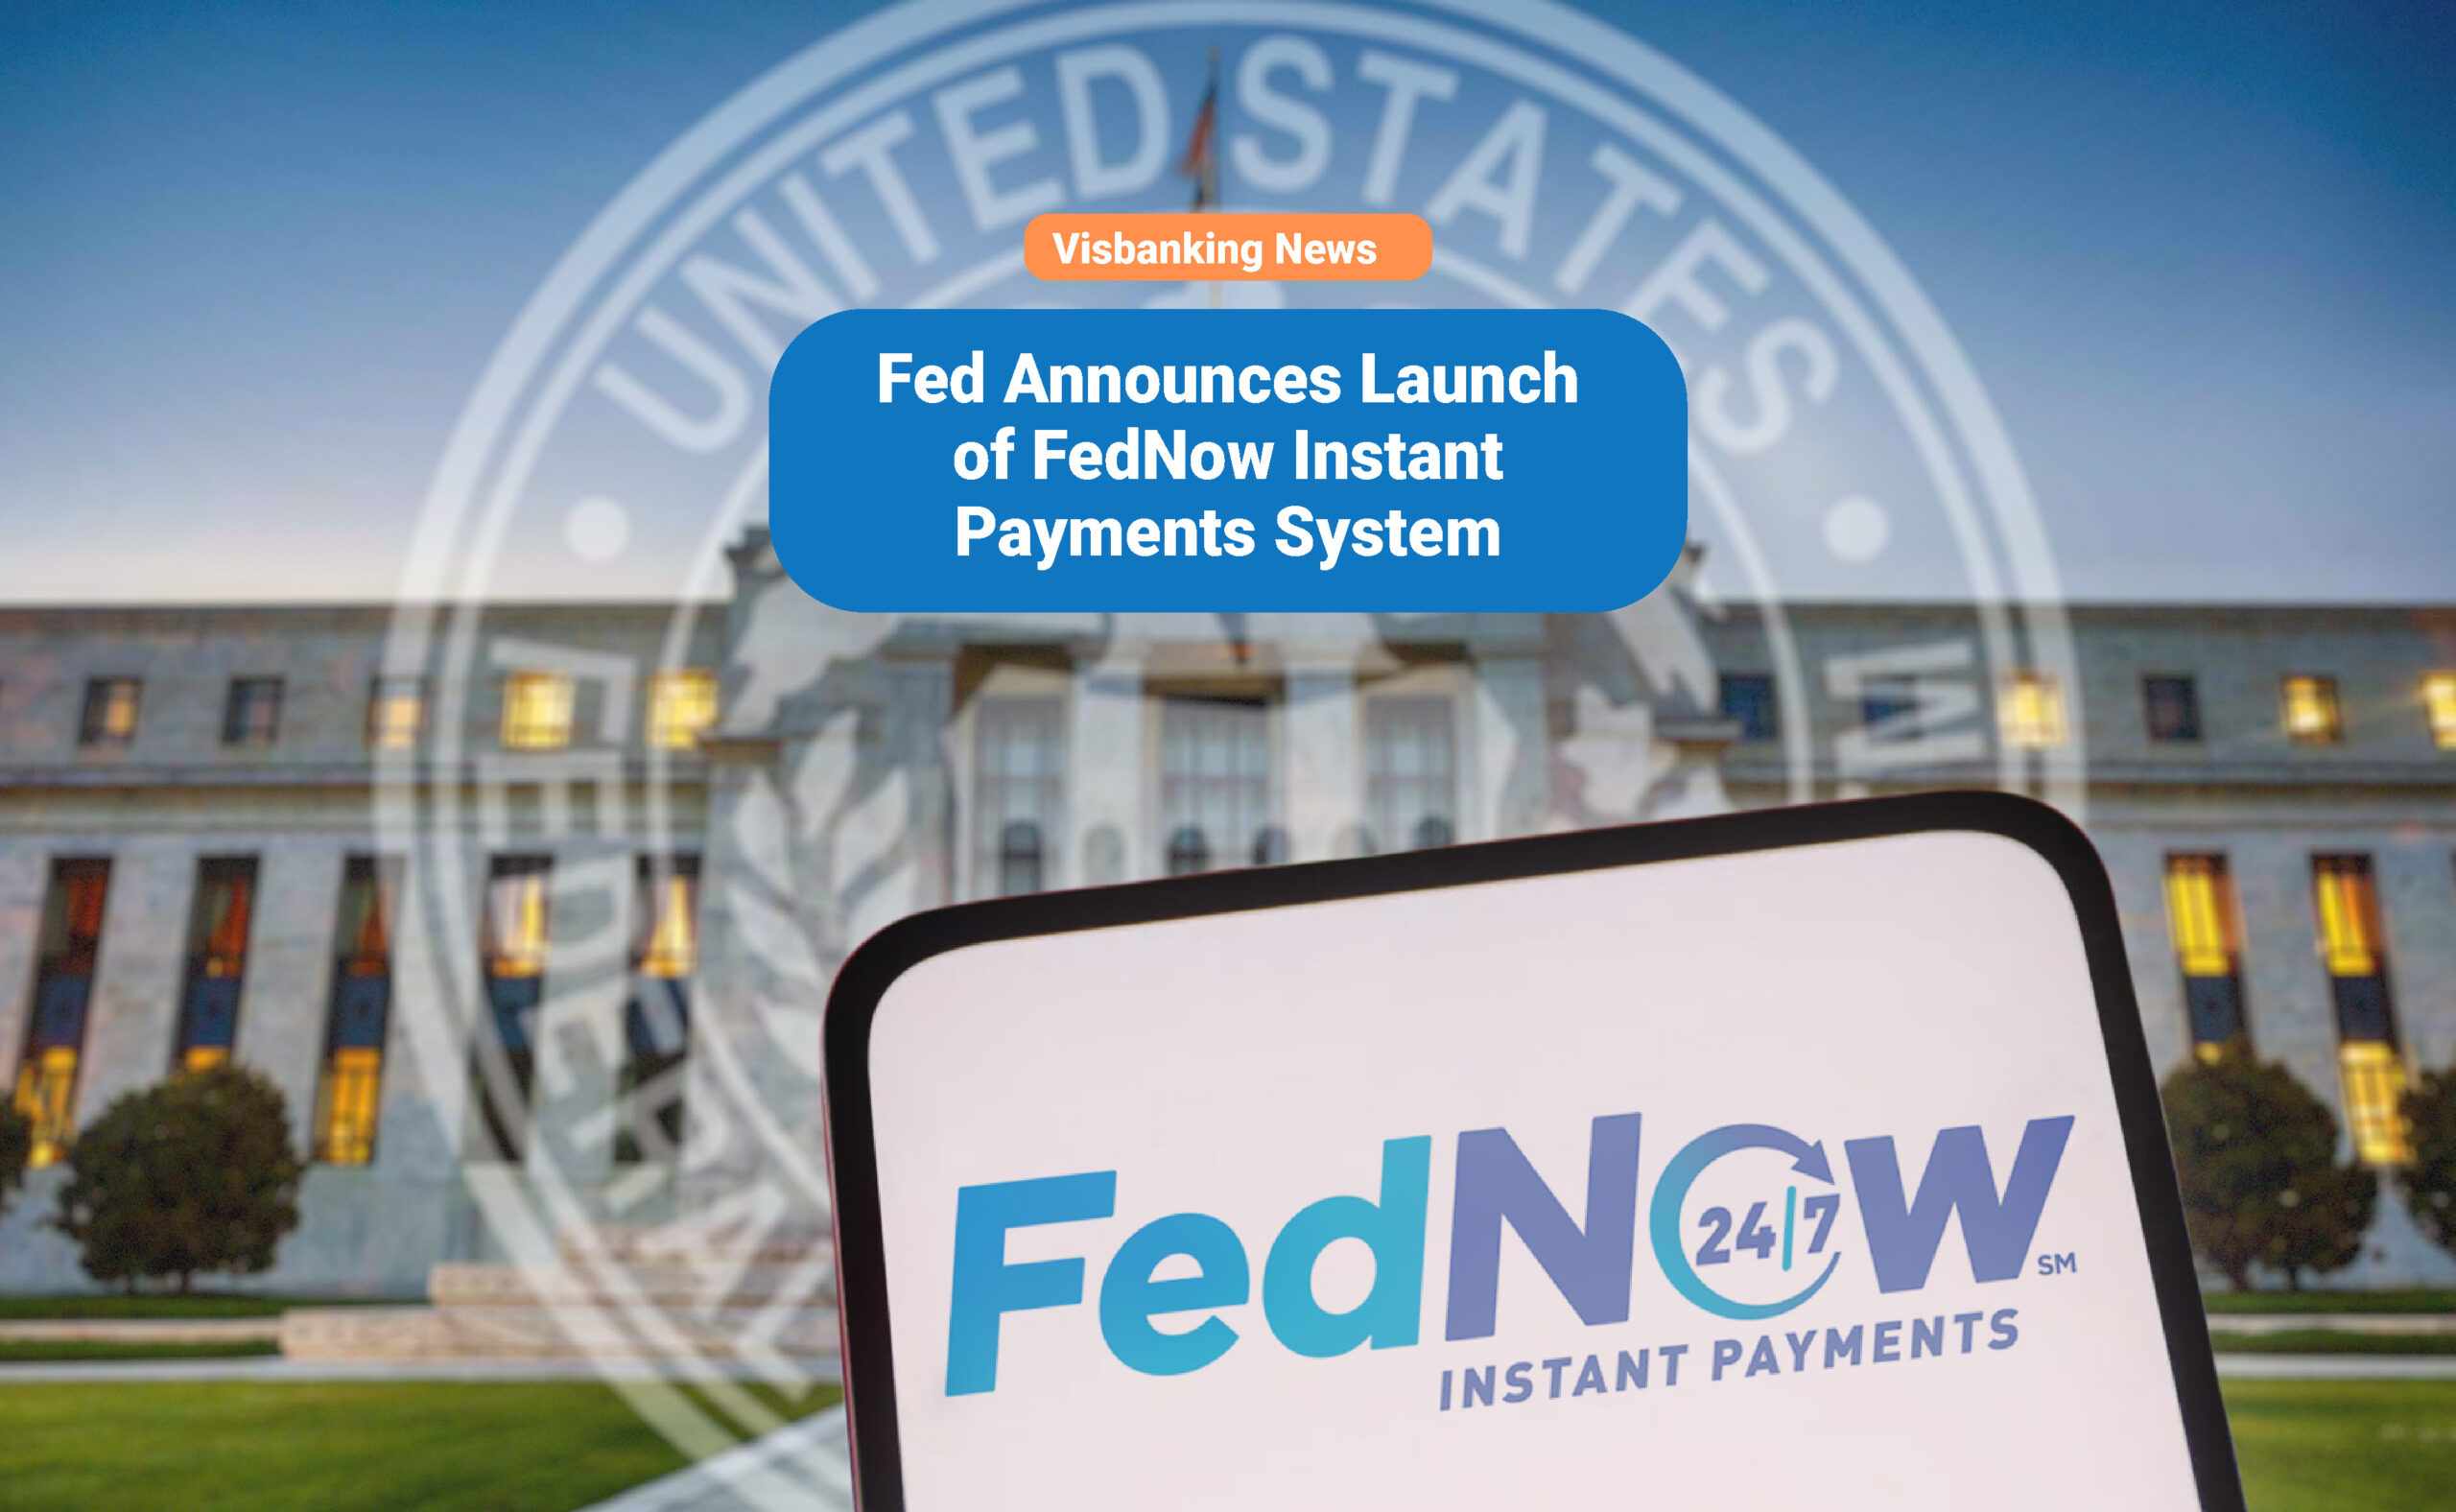 Fed Announces Launch of FedNow Instant Payments System